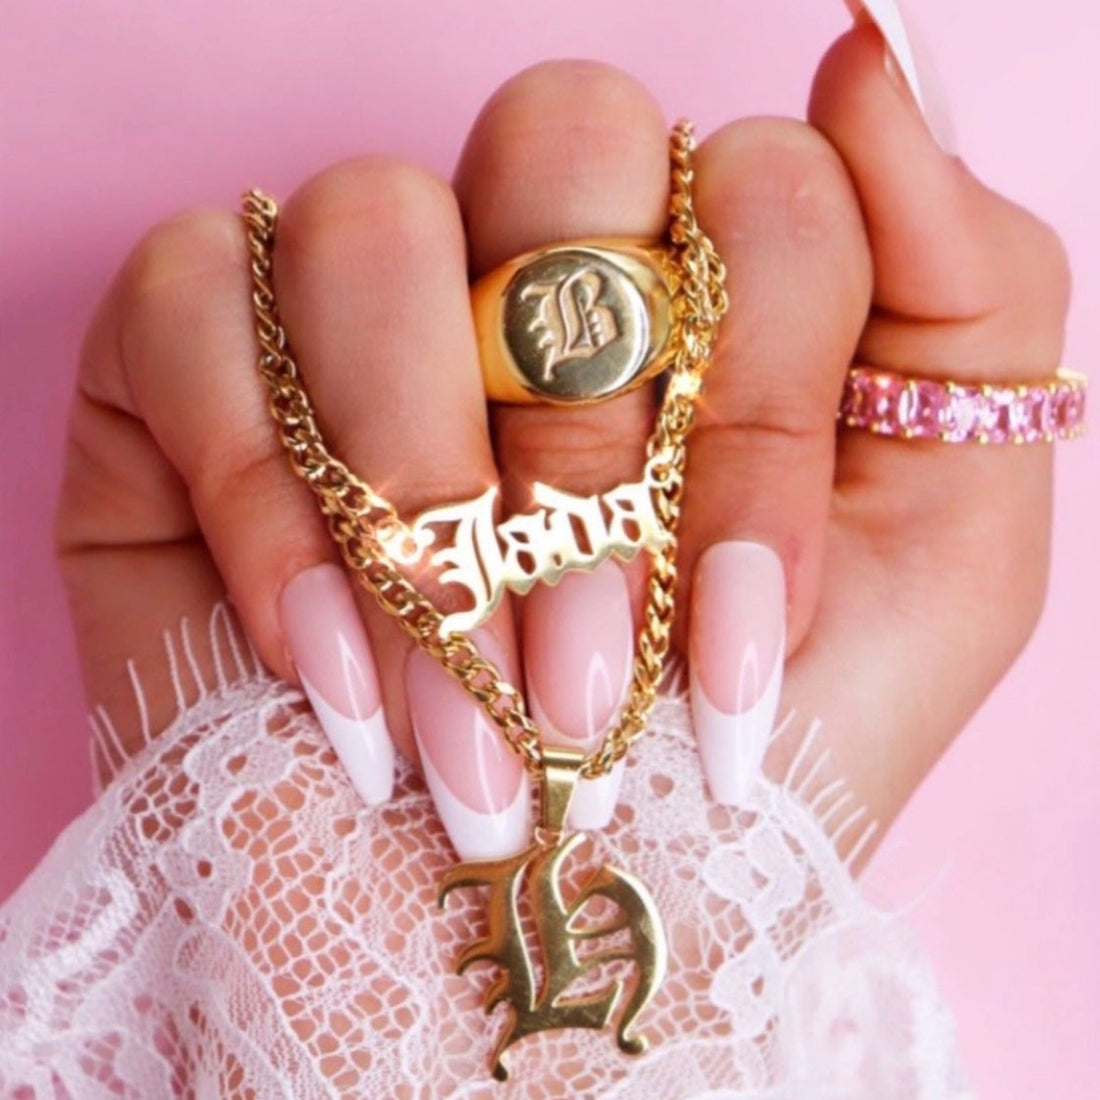 Darlings Signet Ring - Darlings Jewelry | Express Yourself Through Bling!